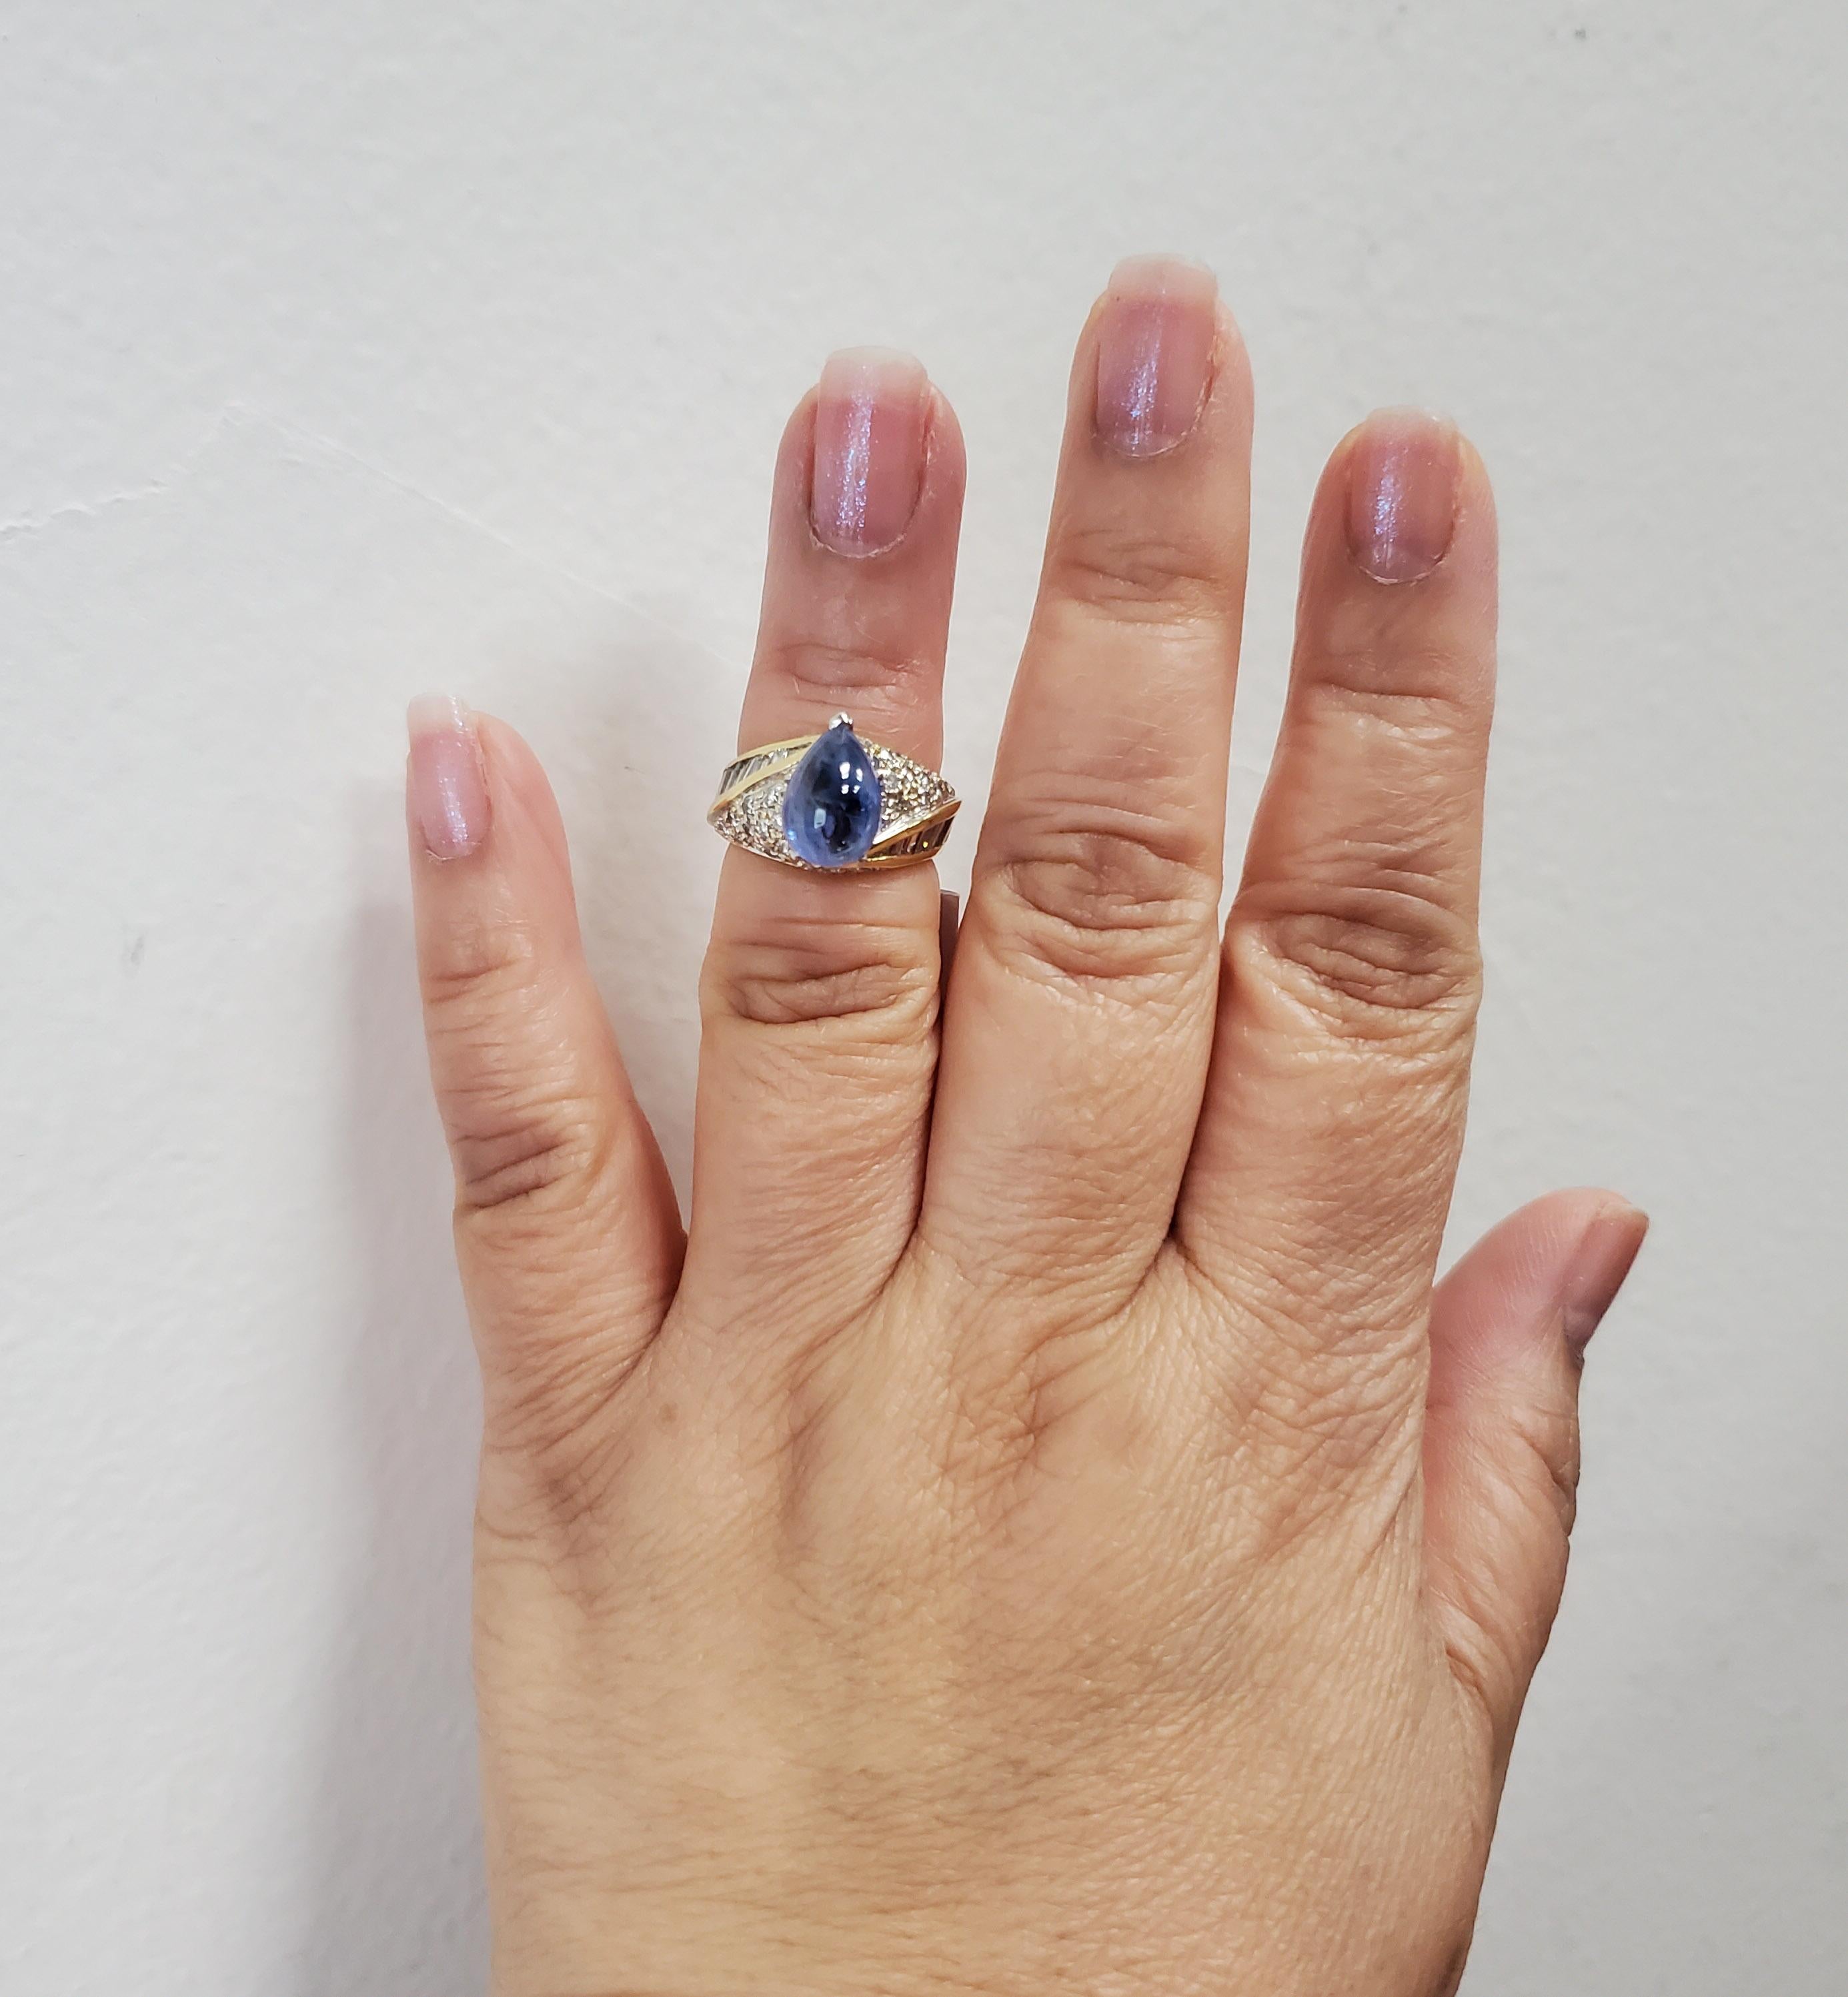 Gorgeous 4.41 ct. blue sapphire cabochon pear shape with 1.00 ct. good quality, white, and bright diamond rounds and baguettes.  Handmade in 18k yellow gold.  Ring size 5.